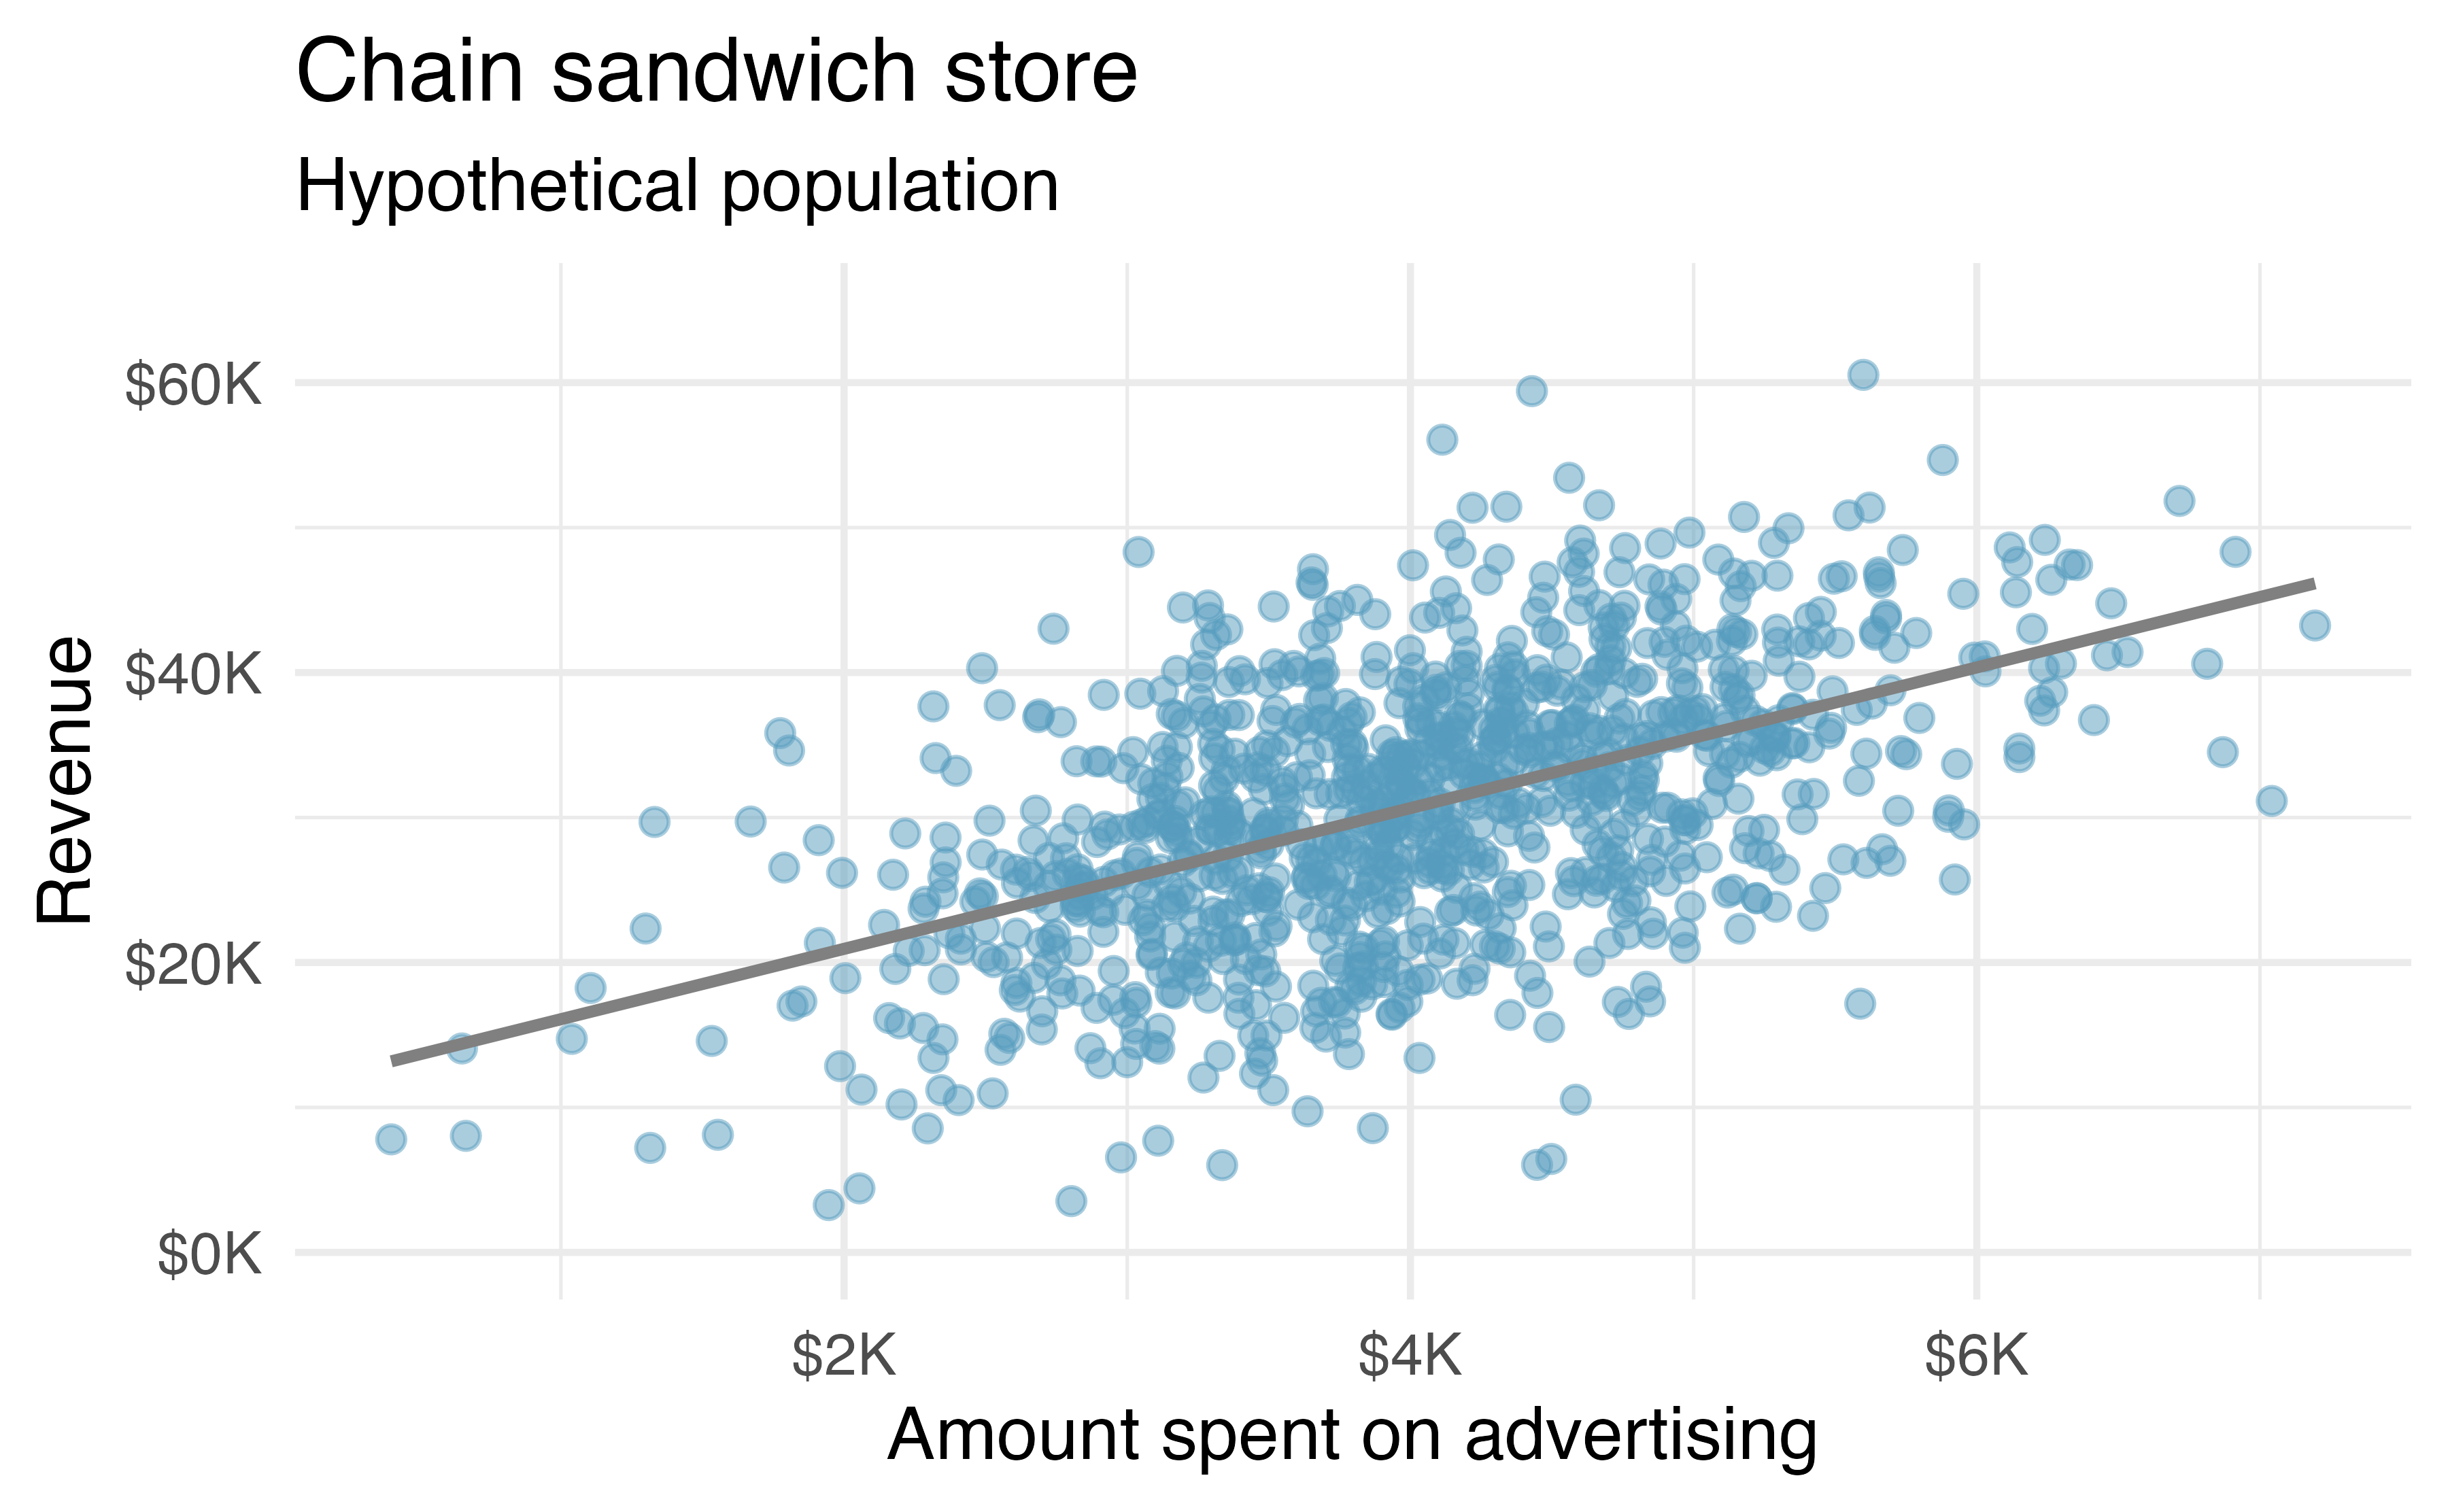 Revenue as a linear model of advertising dollars for a population of sandwich stores, in thousands of dollars.